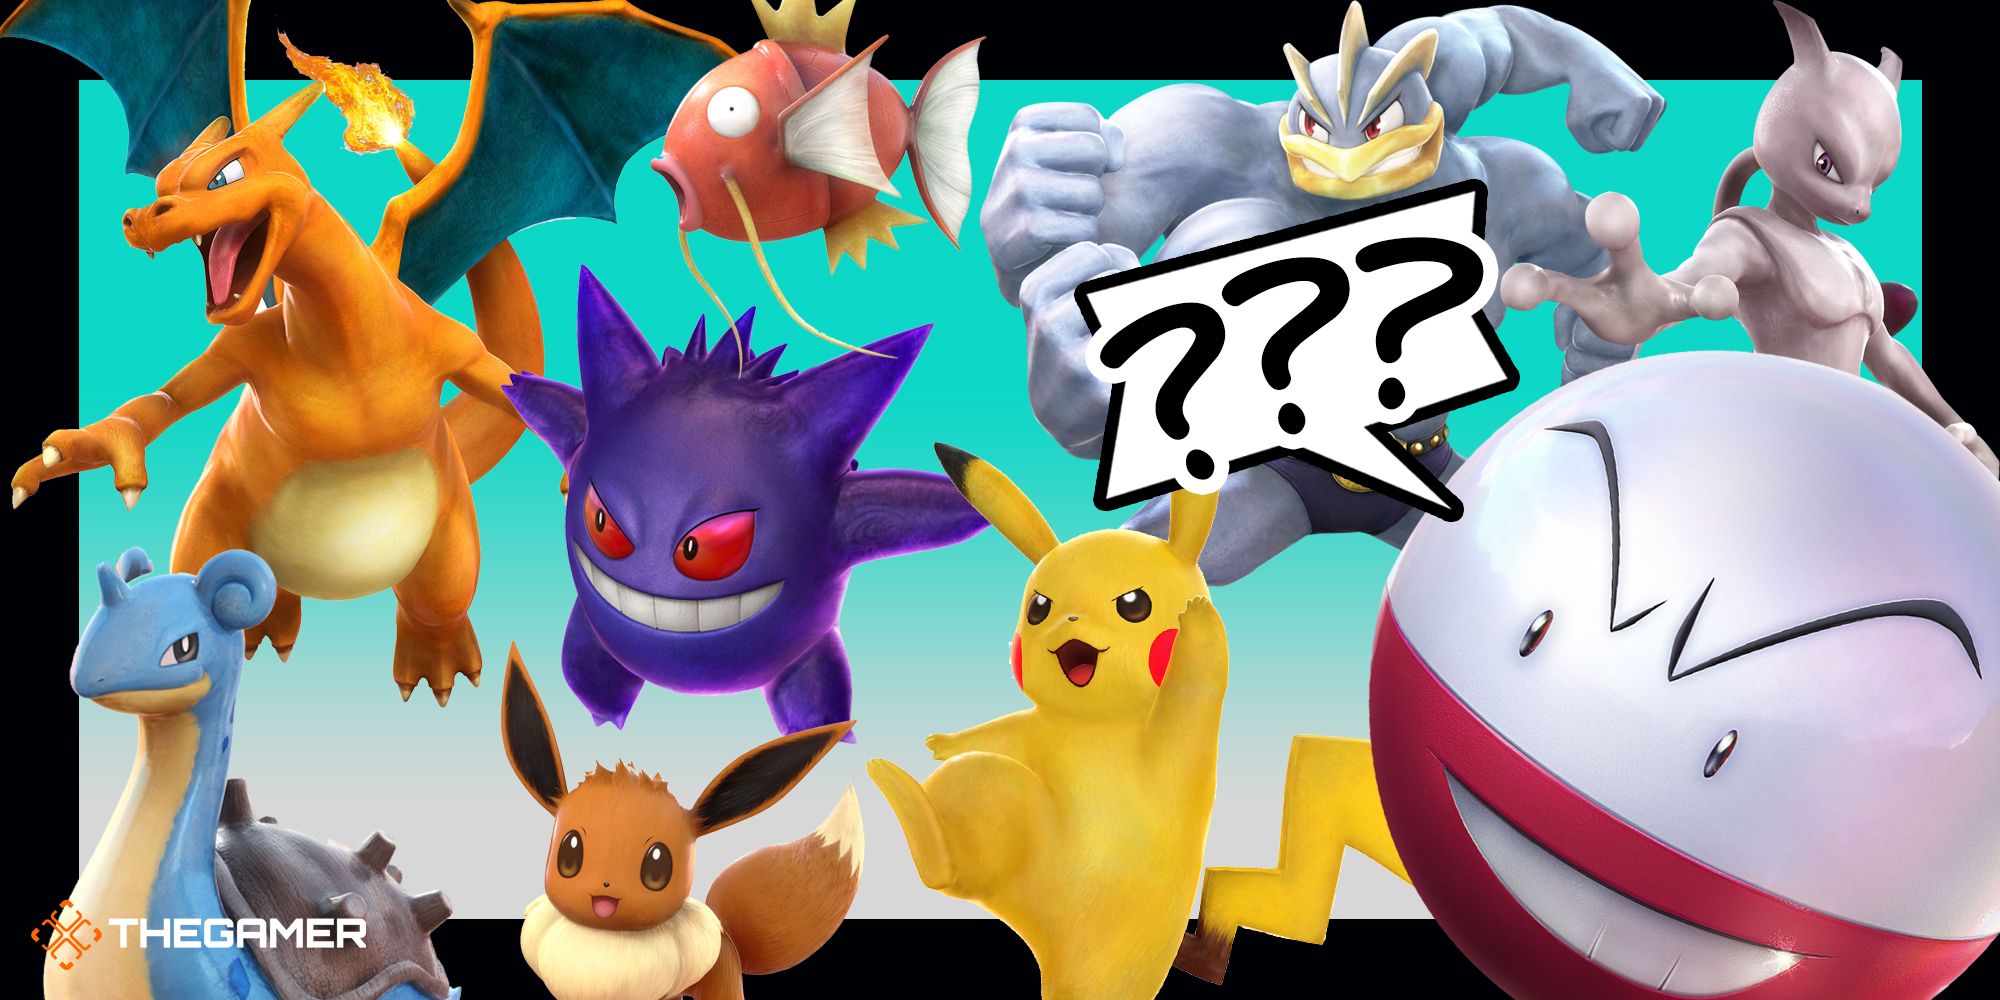 5 mega-evolved Pokémon you won't see in X and Y